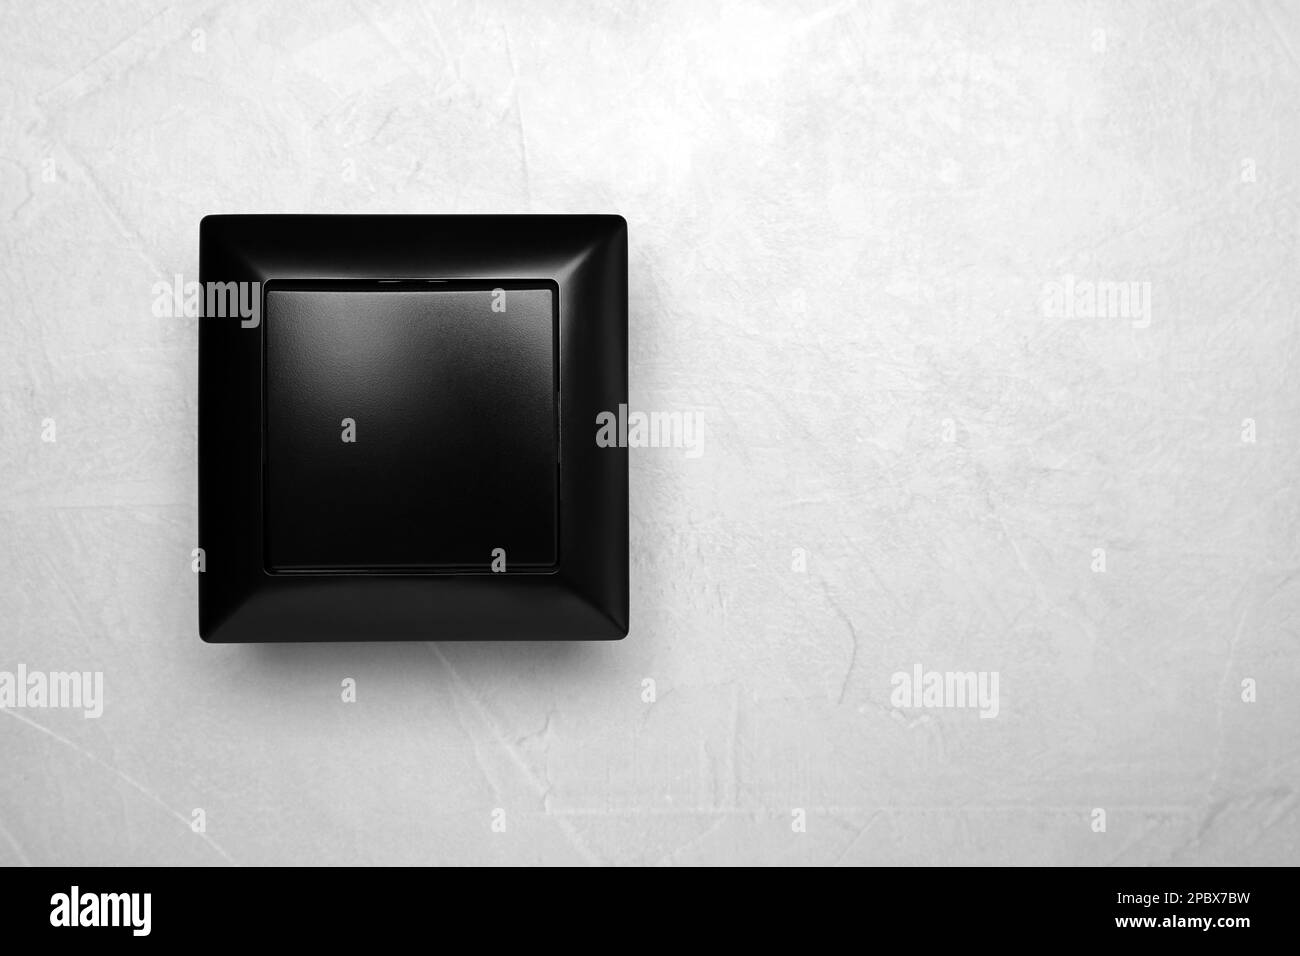 Black light switch on grey background, top view. Space for text Stock Photo